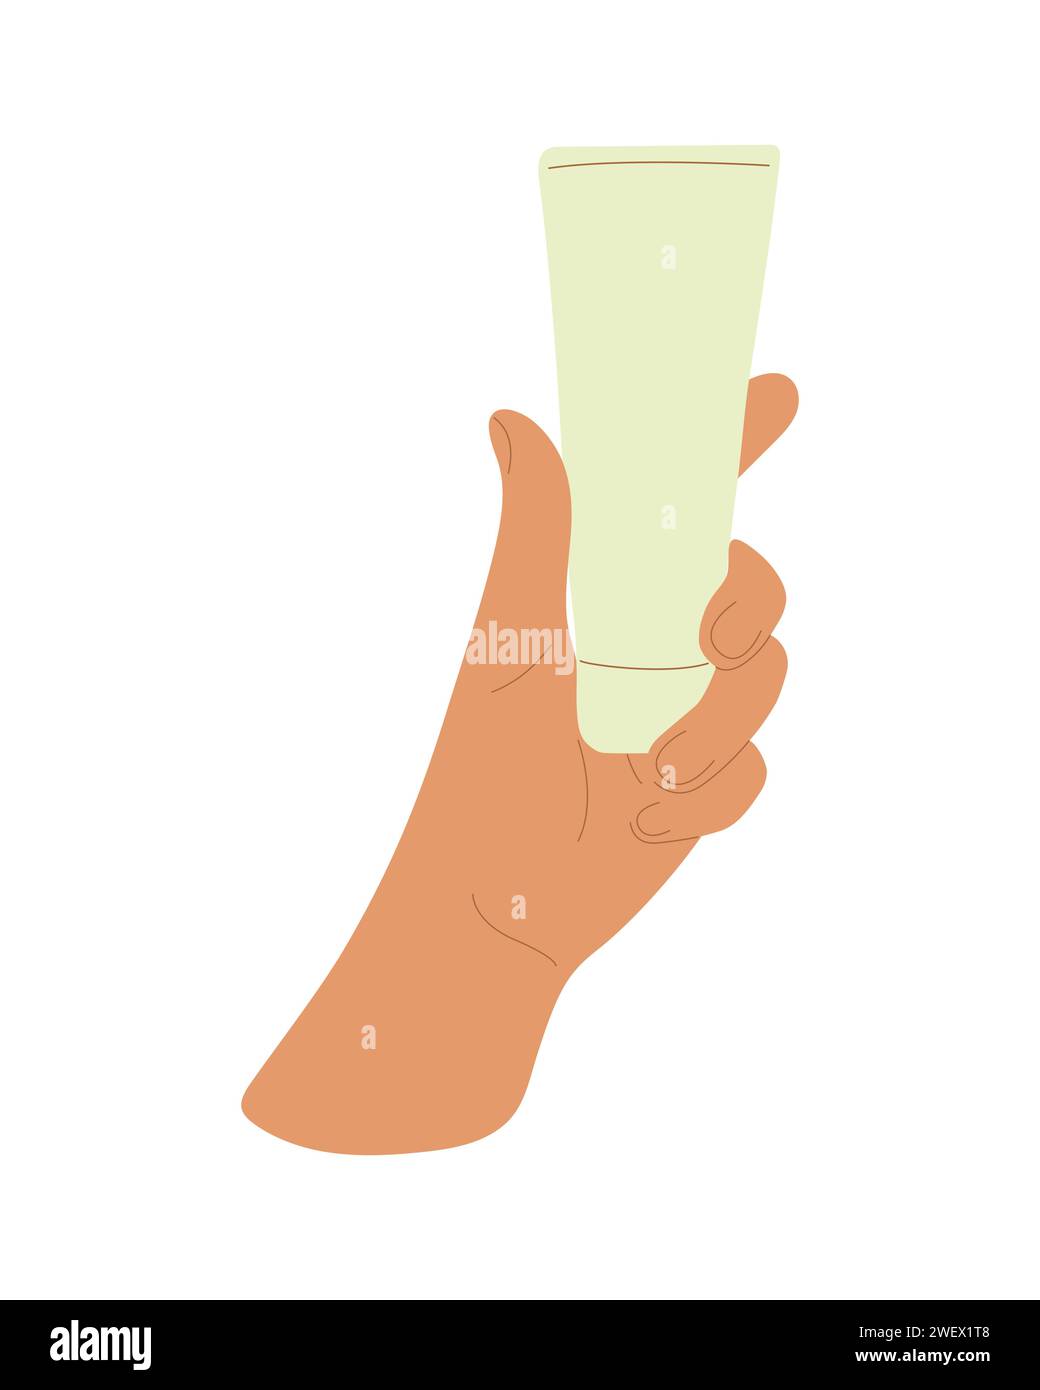 Illustrated image of hand clutching an empty tube mockup on white background. Stock Vector